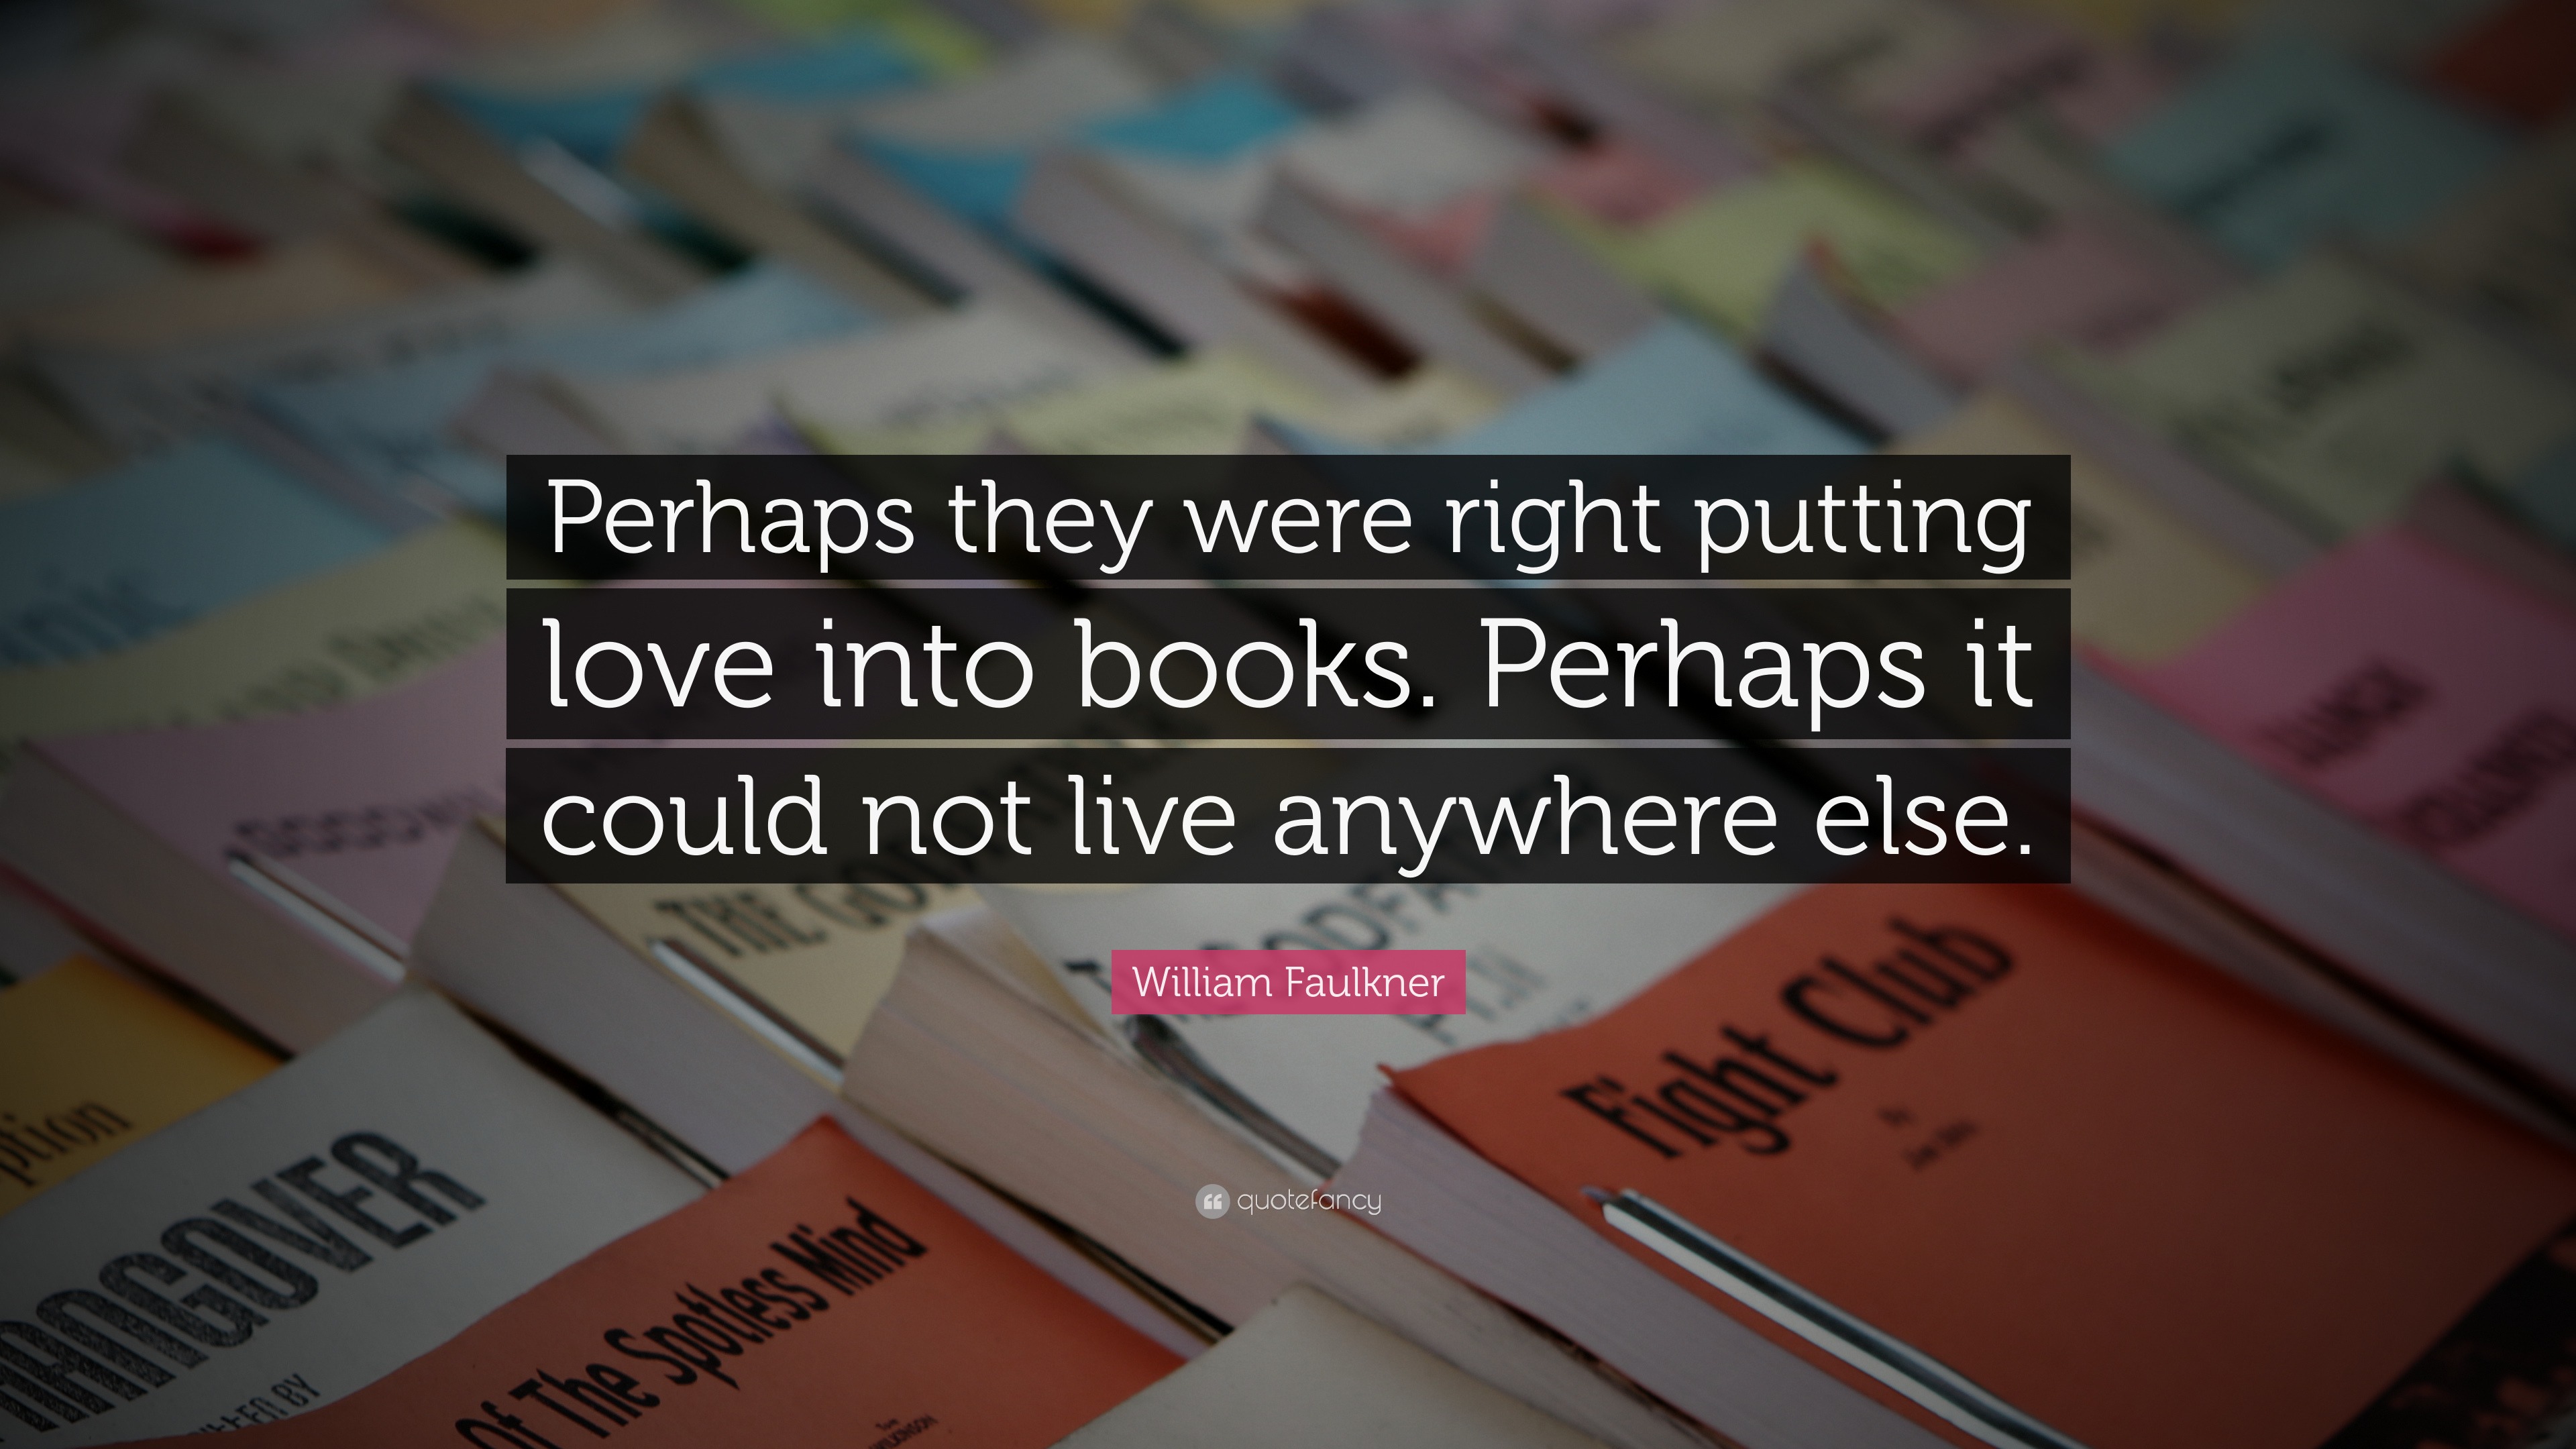 William Faulkner Quote Perhaps They Were Right Putting Love Into Books Perhaps It Could Not Live Anywhere Else 12 Wallpapers Quotefancy